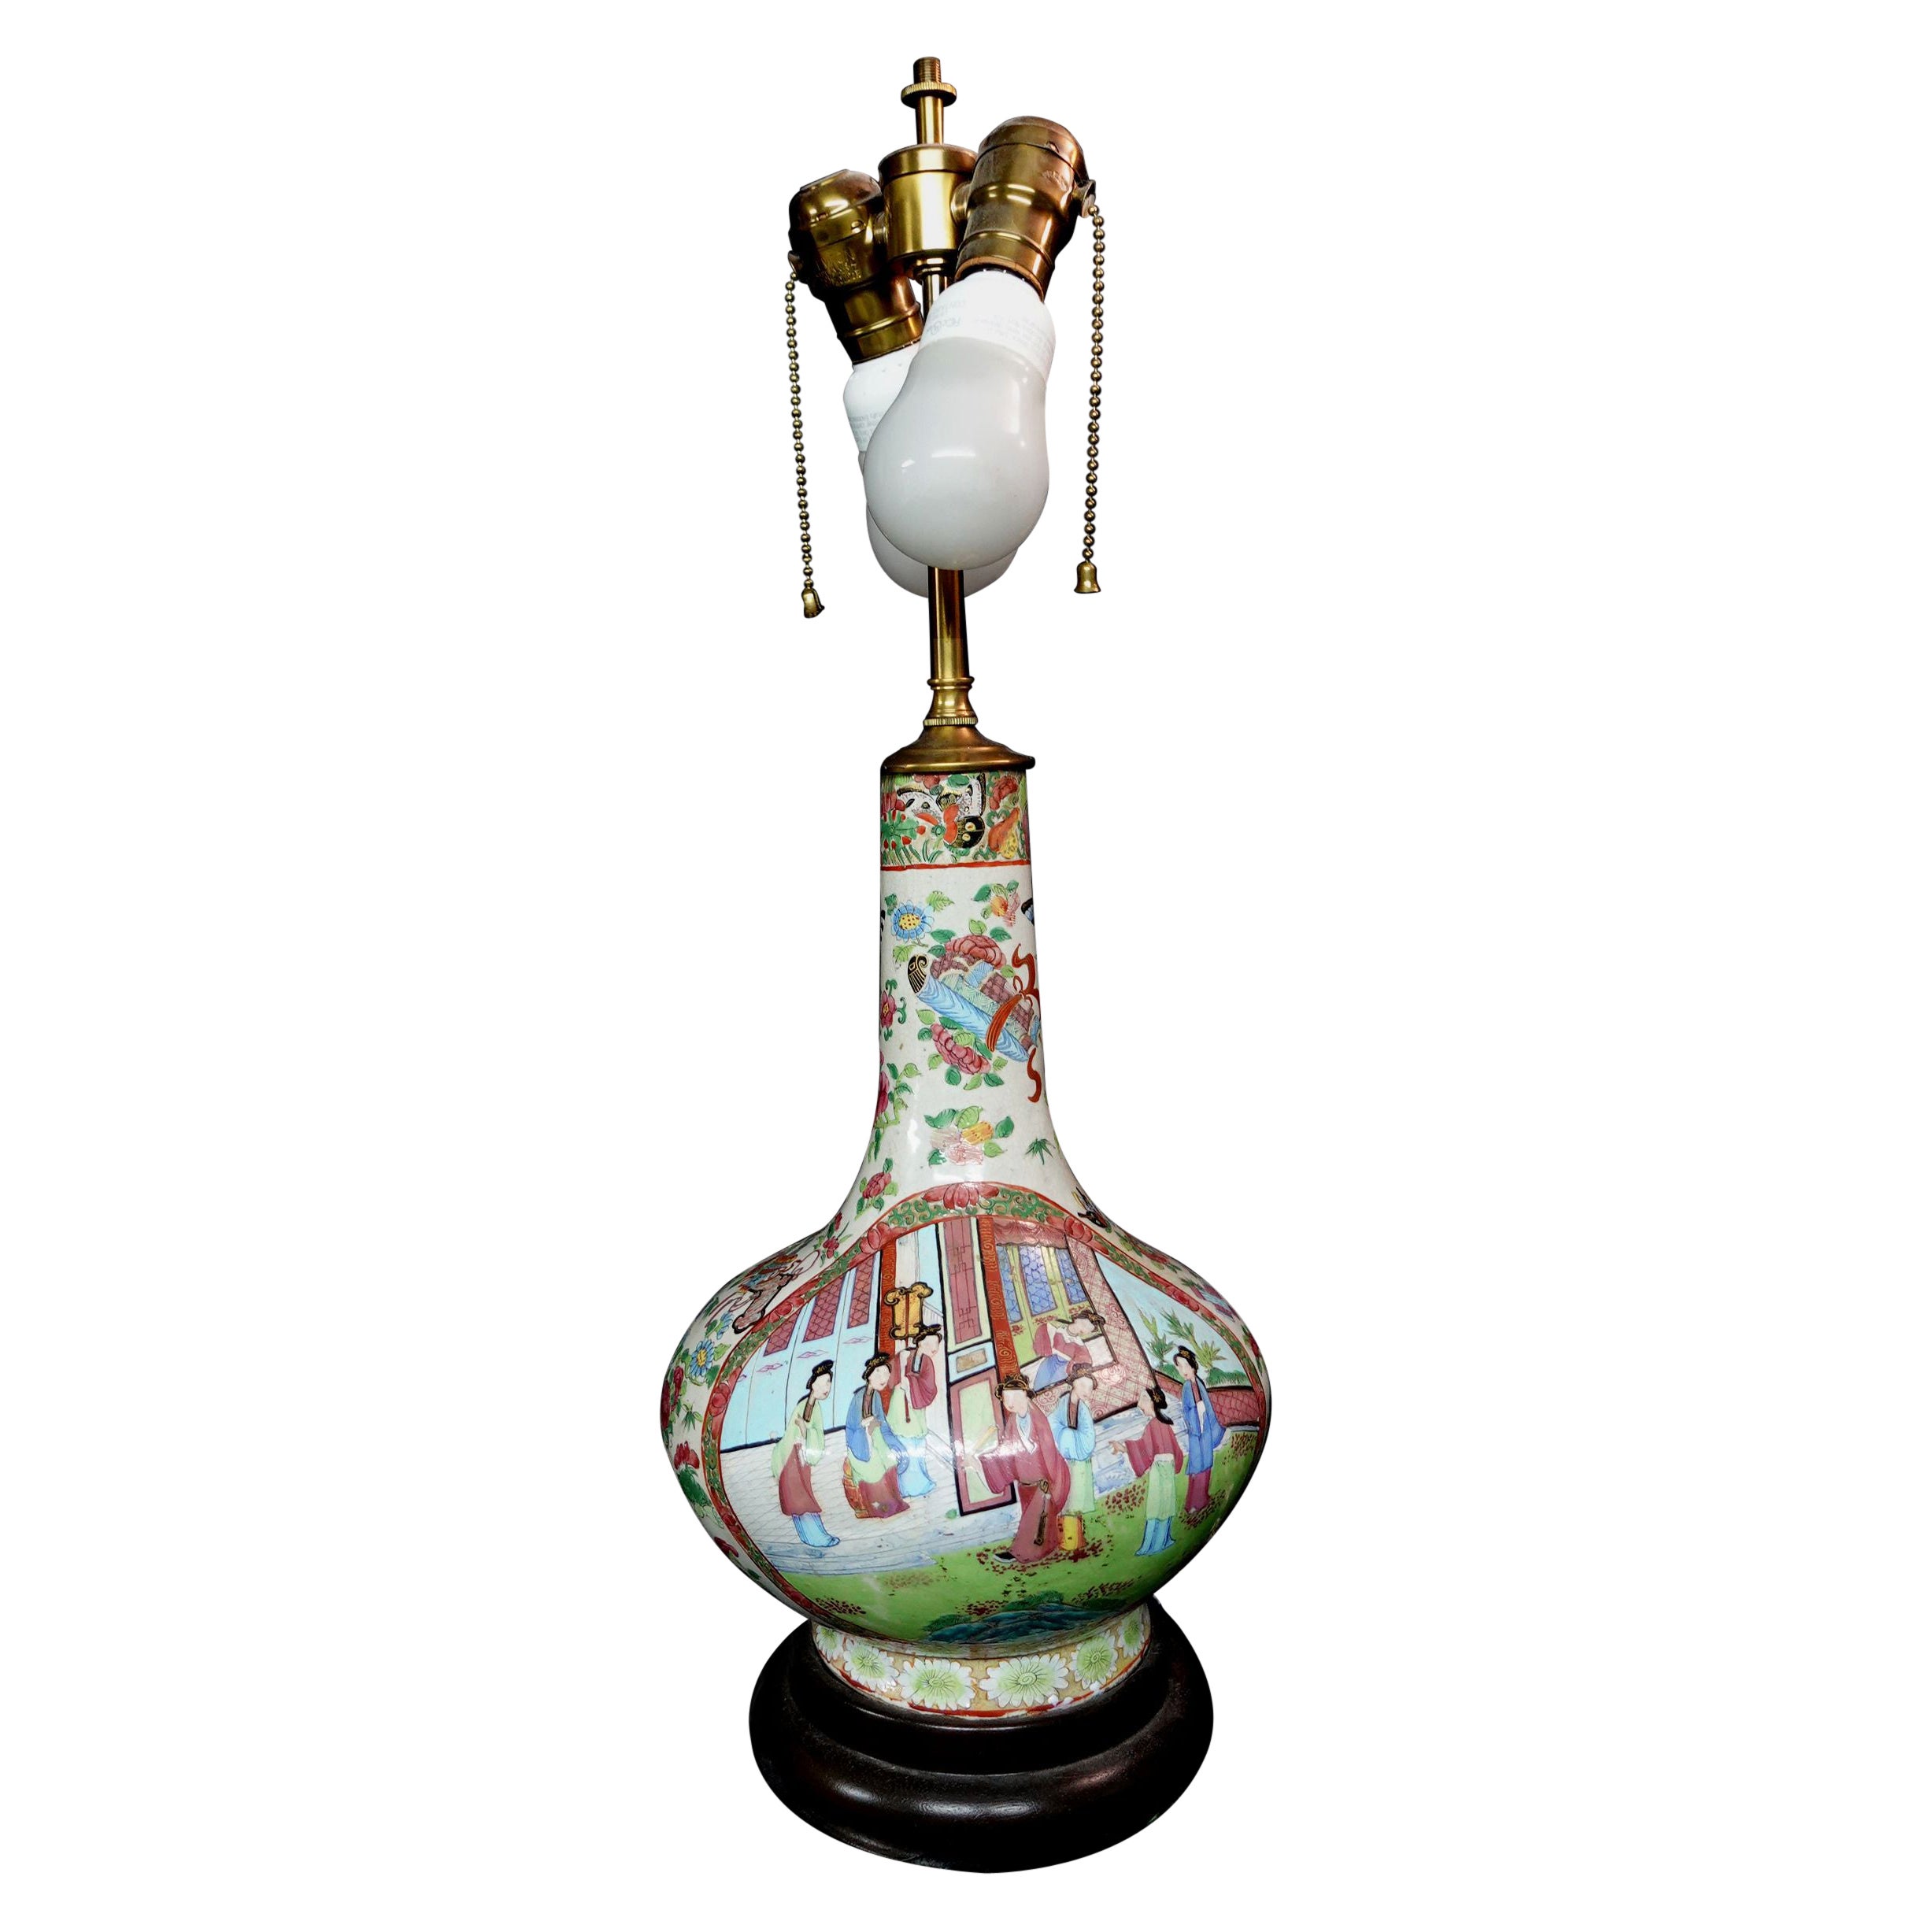 Famille Rose Export Porcelain Water Bottle Lamp Early 19th Century